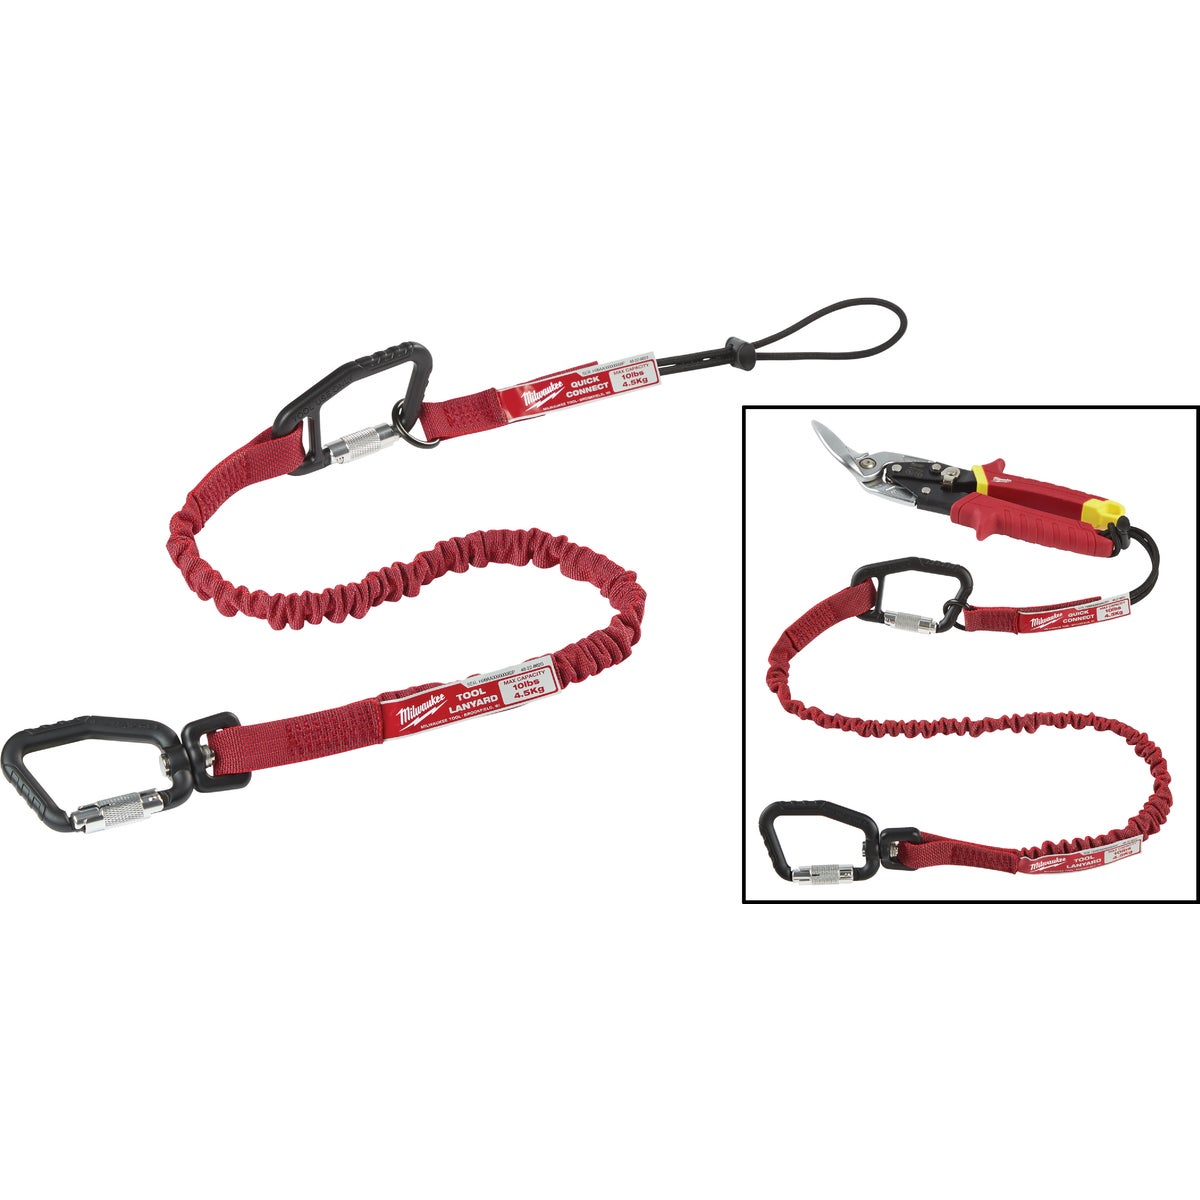 Item 369857, Quick-connect locking tool lanyard helps users stay safe and stay 